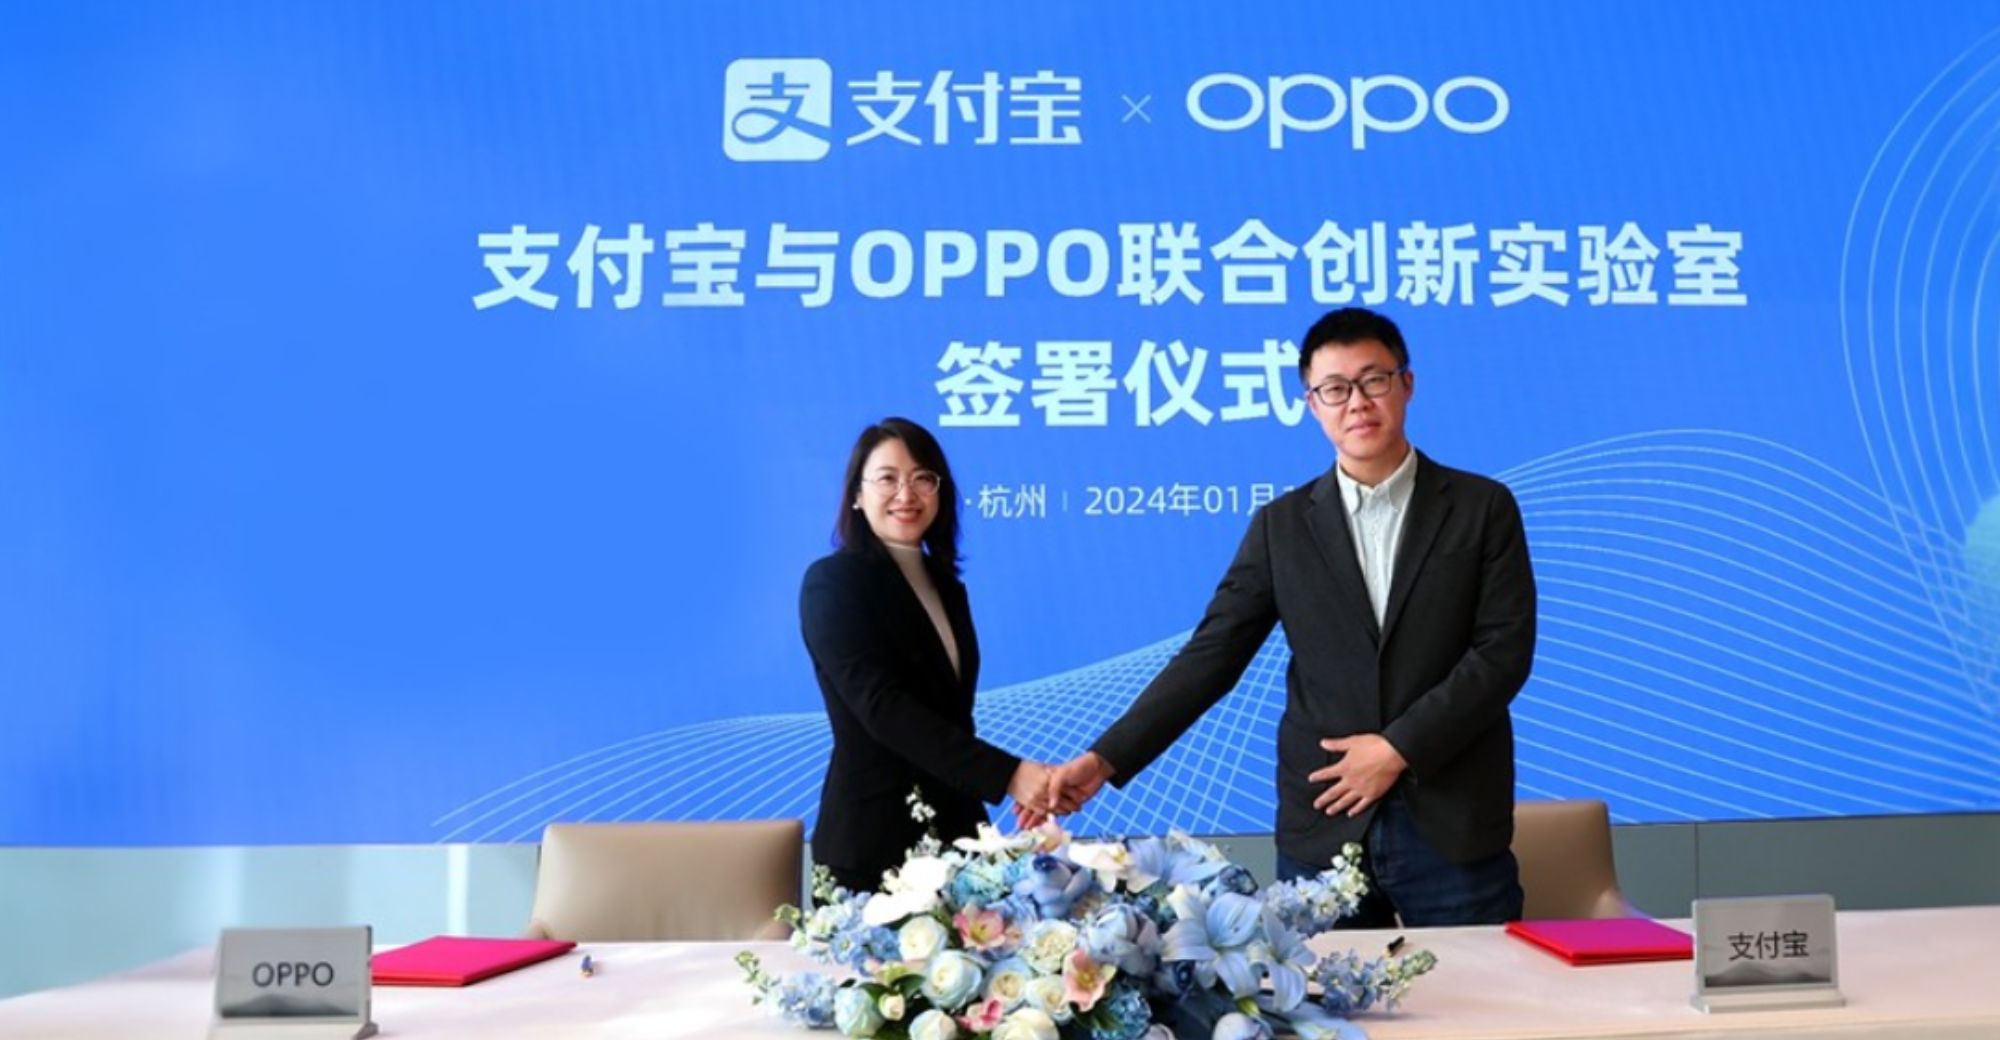 OPPO and Alipay Establish A Joint Innovation Lab